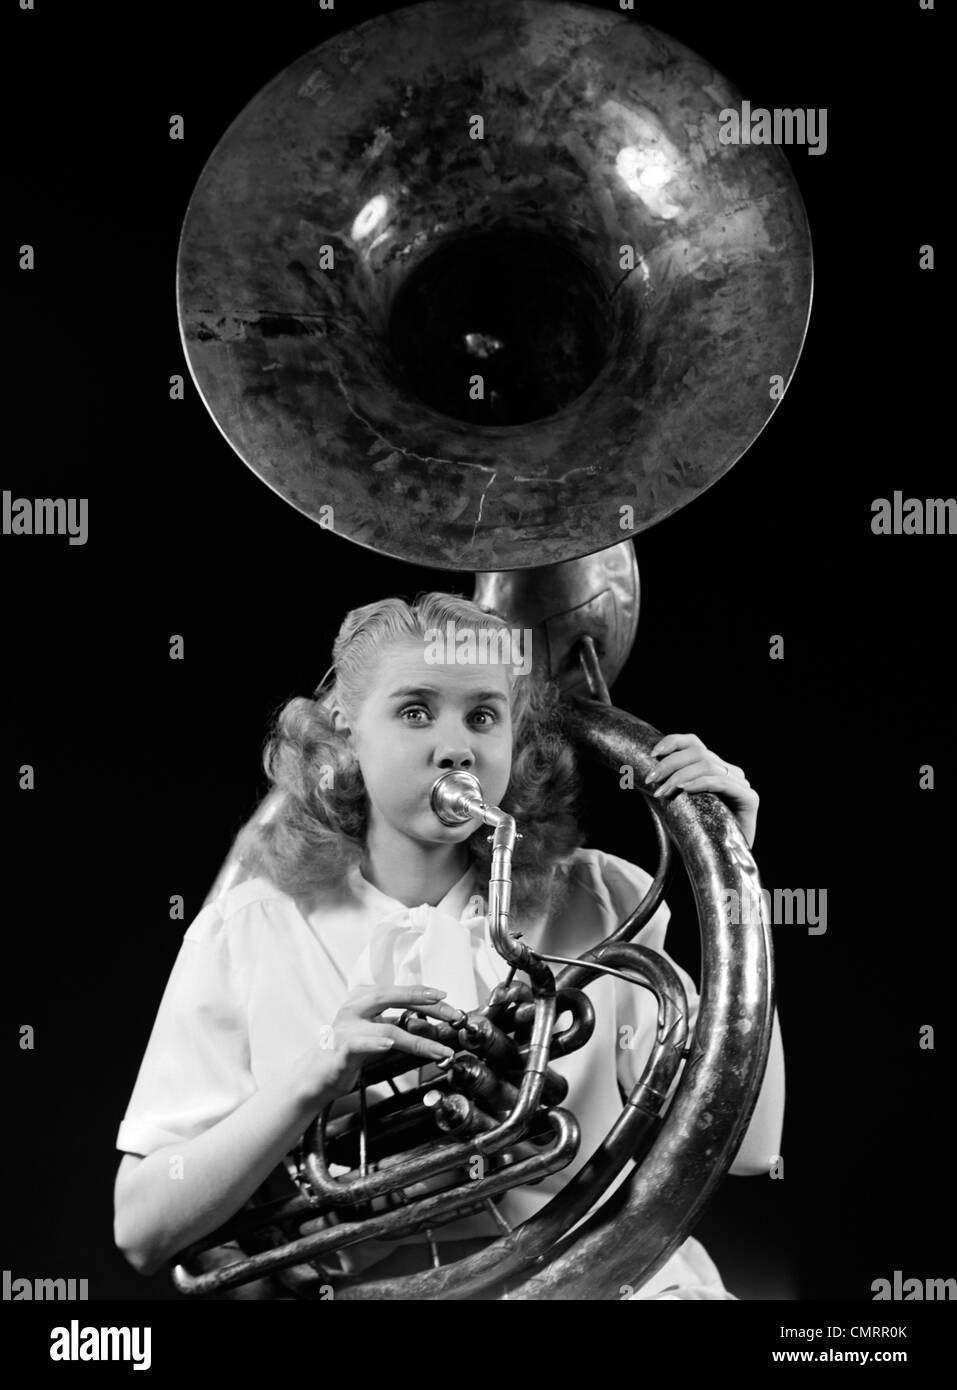 1940s TEENAGE WOMAN BLOWING AND PLAYING TUBA HORN MUSICAL INSTRUMENT WITH EYES WIDE OPEN LOOKING AT CAMERA Stock Photo